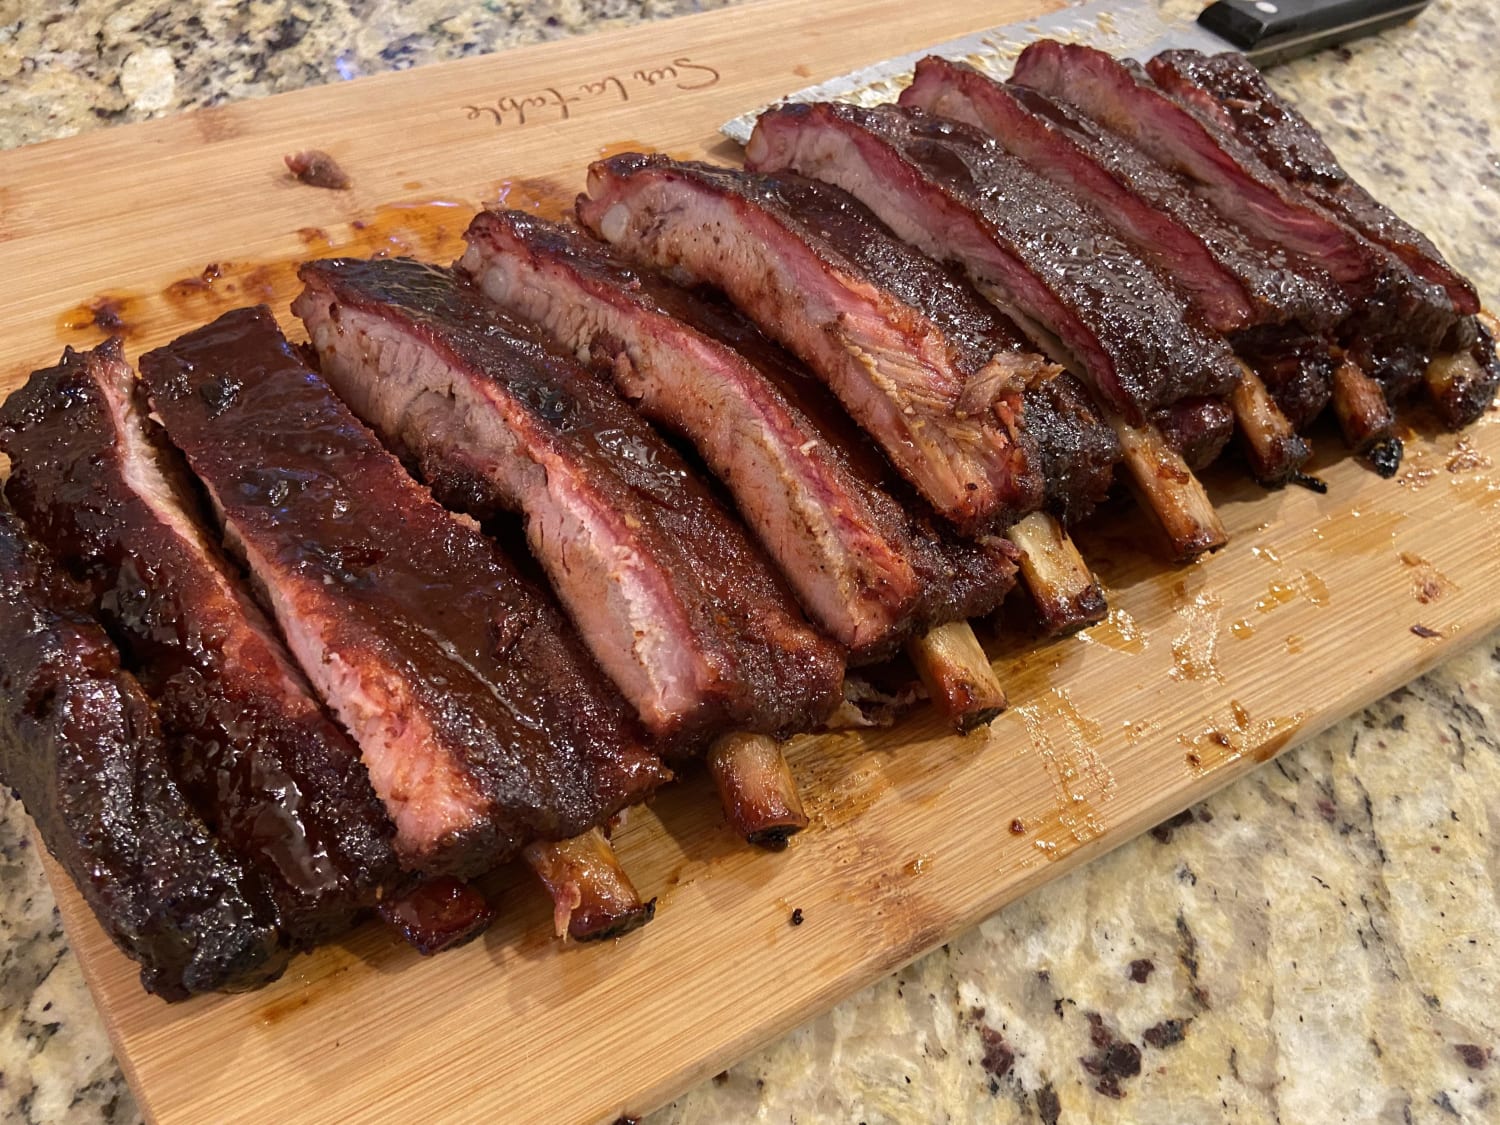 St. Louis ribs smoked with cherry wood and lump. Finished them off with a mango glaze